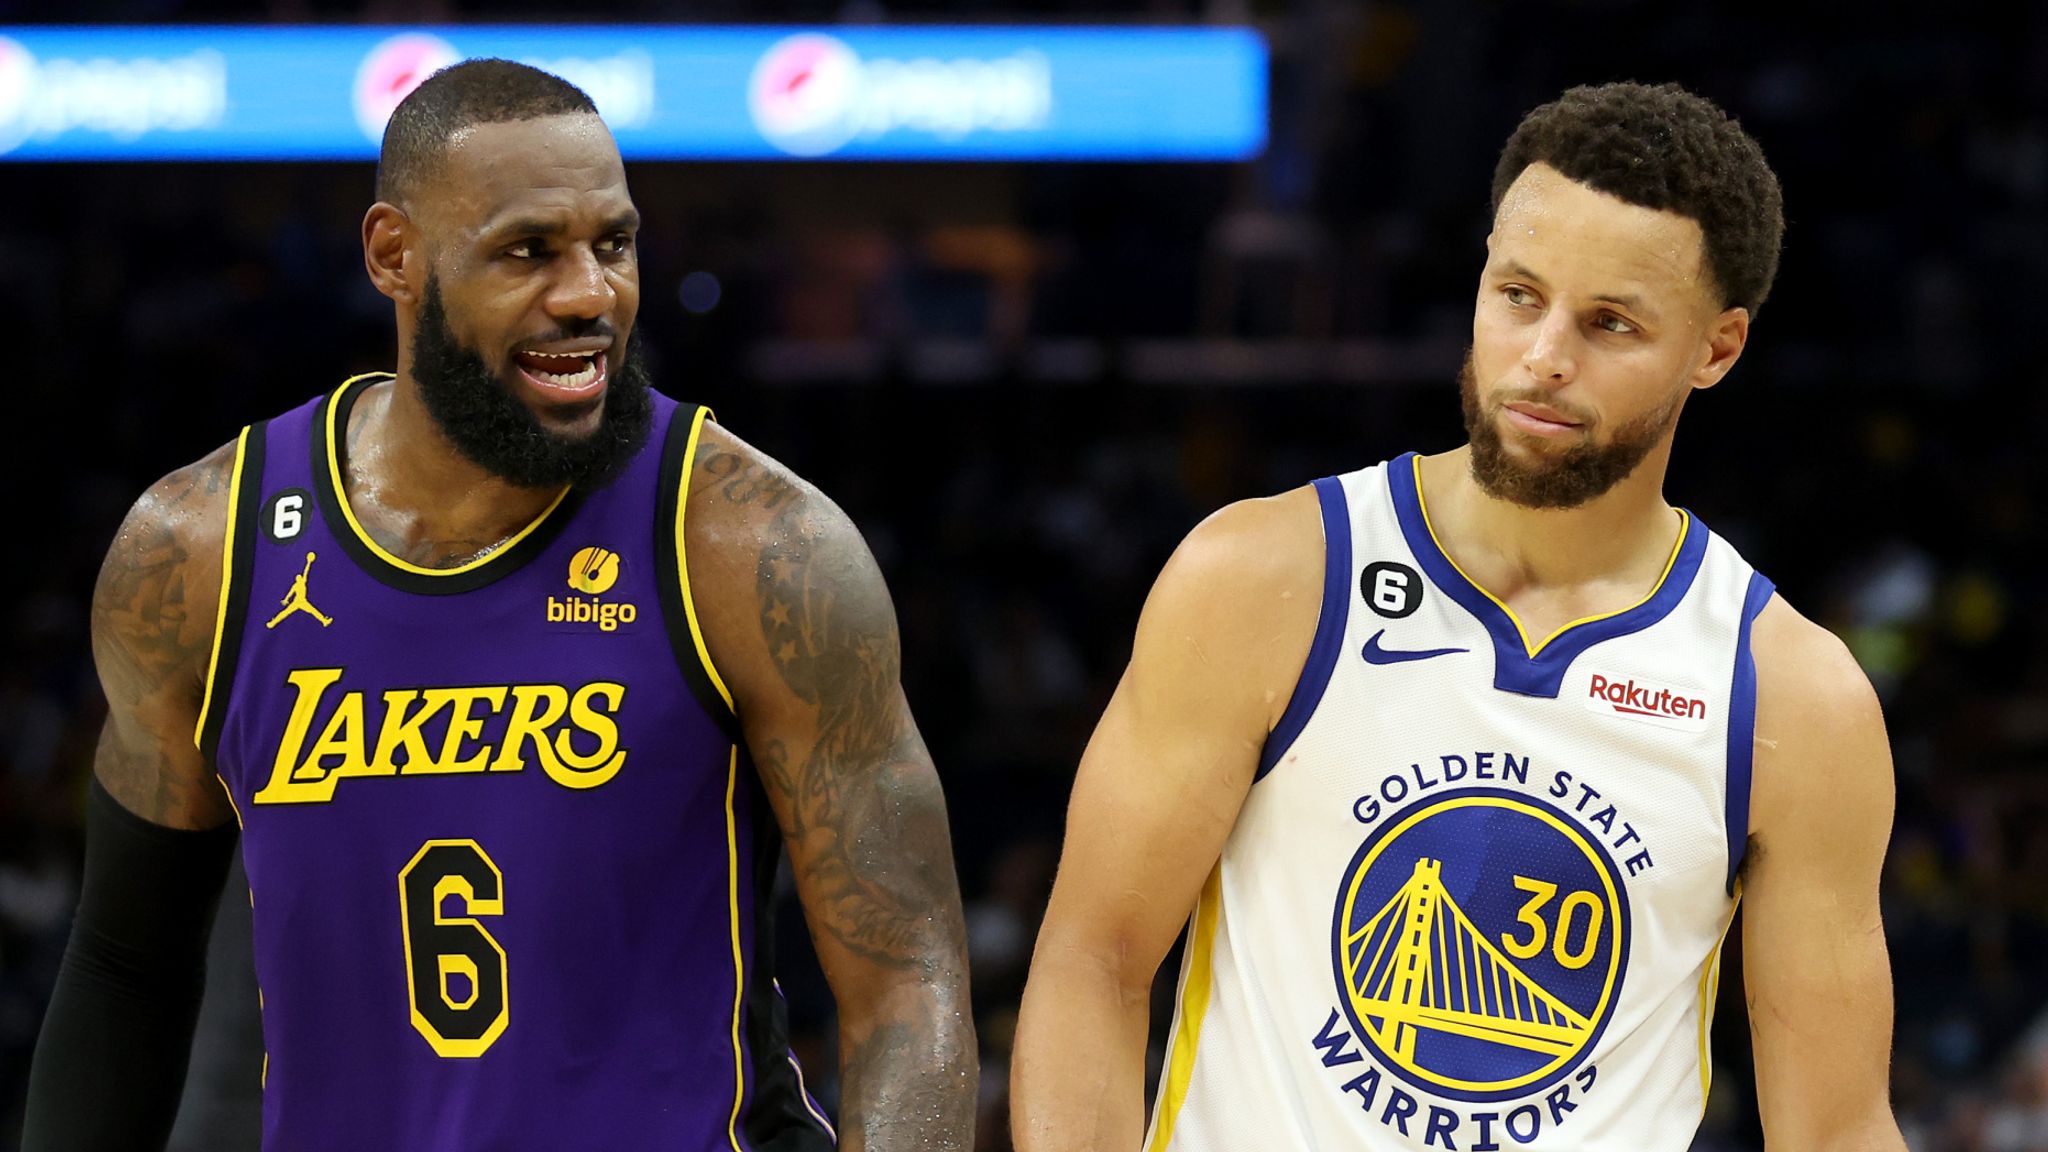 The Great Debate: Should the Warriors Trade for LeBron James?